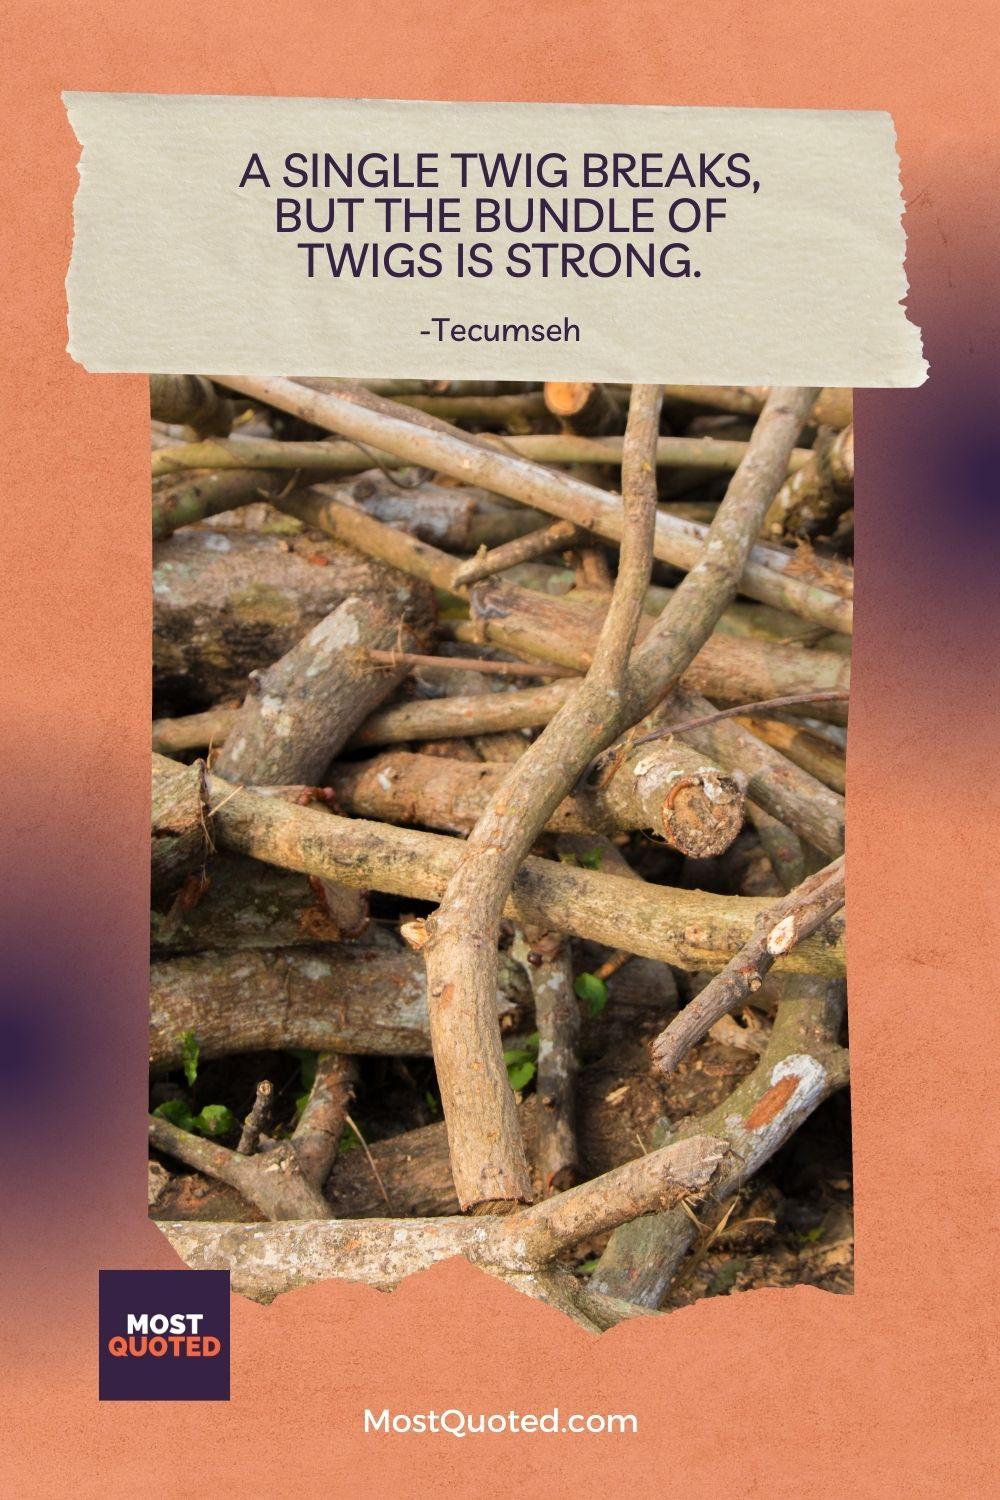 A single twig breaks, but the bundle of twigs is strong. - Tecumseh